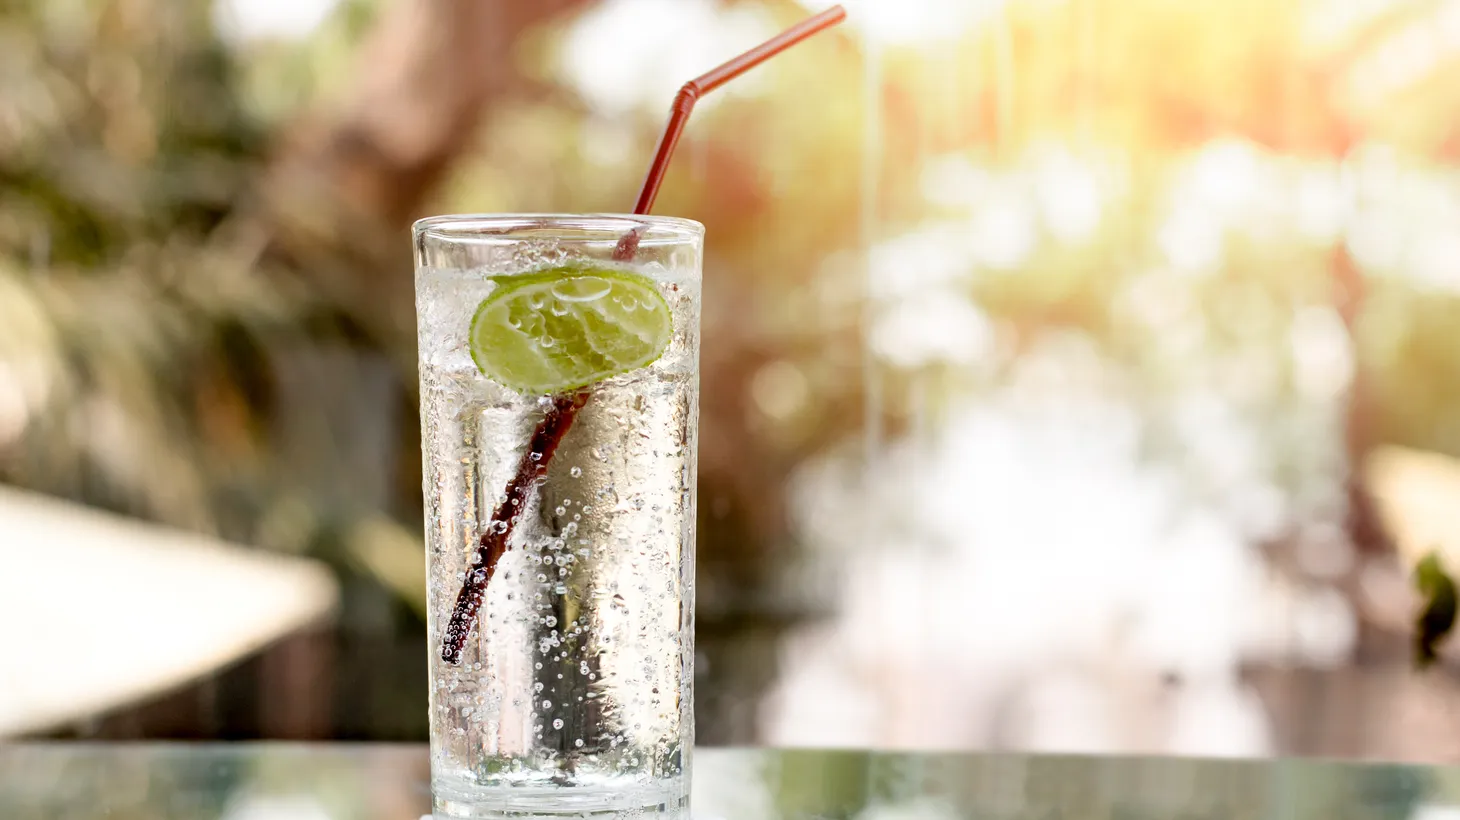 You may not need to drink eight glasses of water per day, depending on your physical activity level, medical conditions, environment, and body size. But one thing is certain: Americans love the carbonated option.